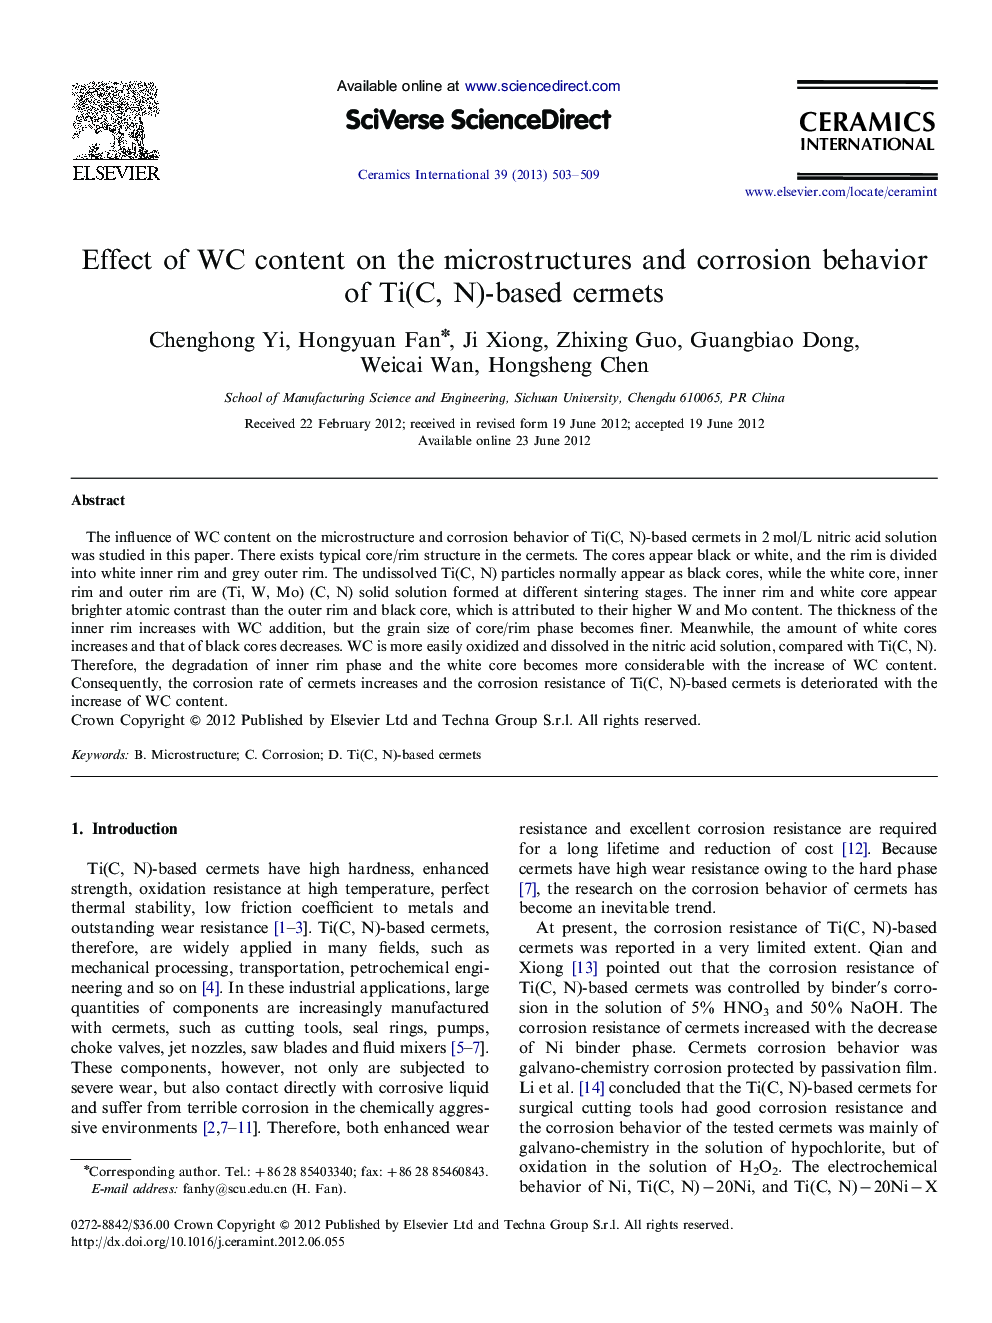 Effect of WC content on the microstructures and corrosion behavior of Ti(C, N)-based cermets